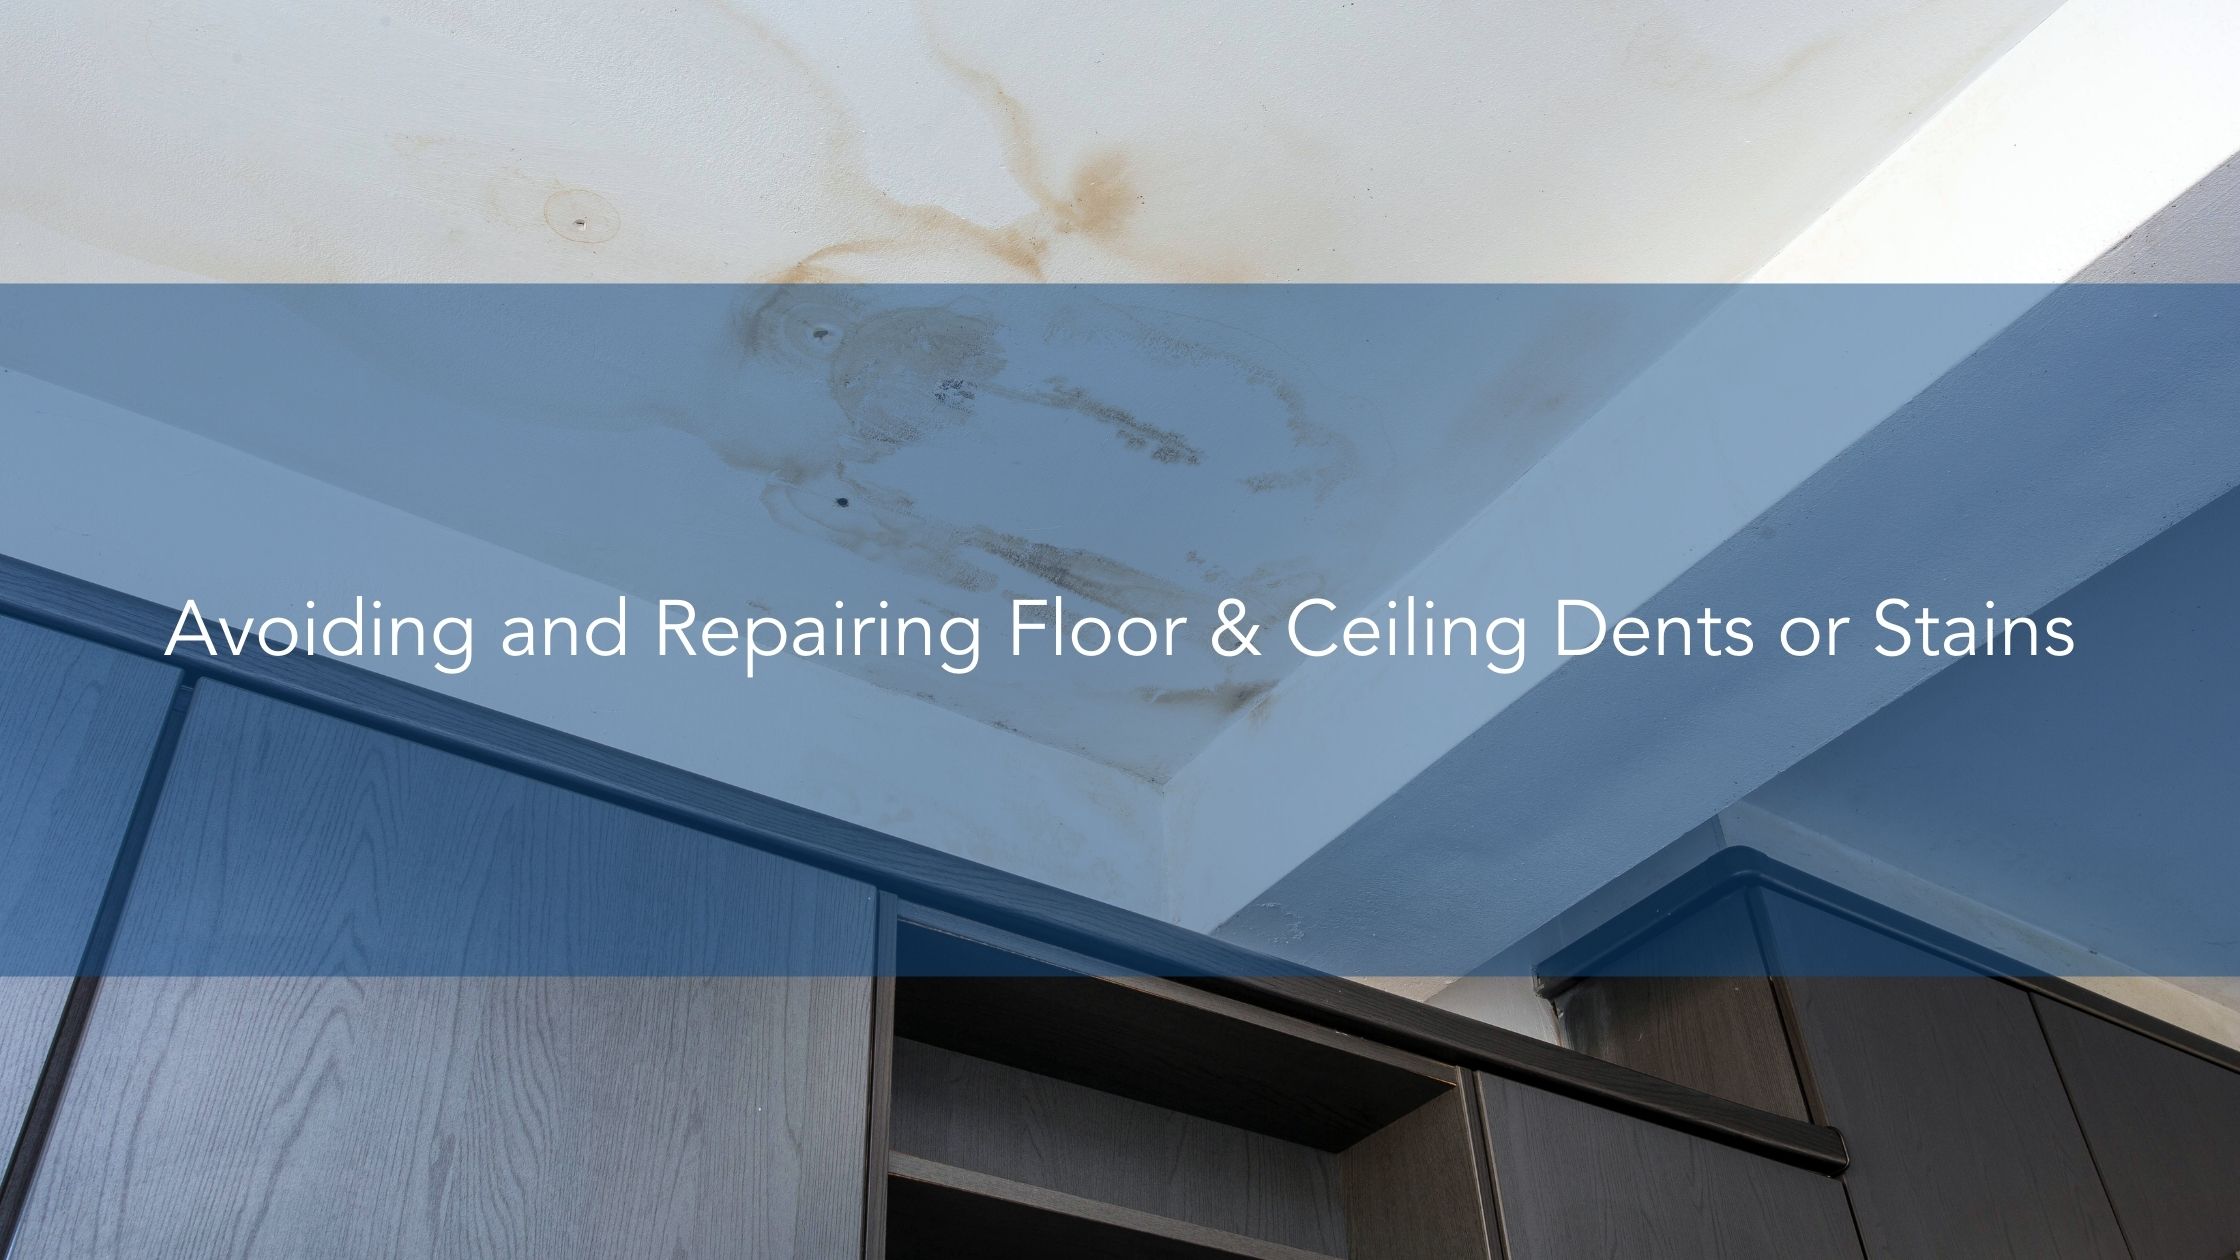 Avoiding and Repairing Floor & Ceiling Dents or Stains